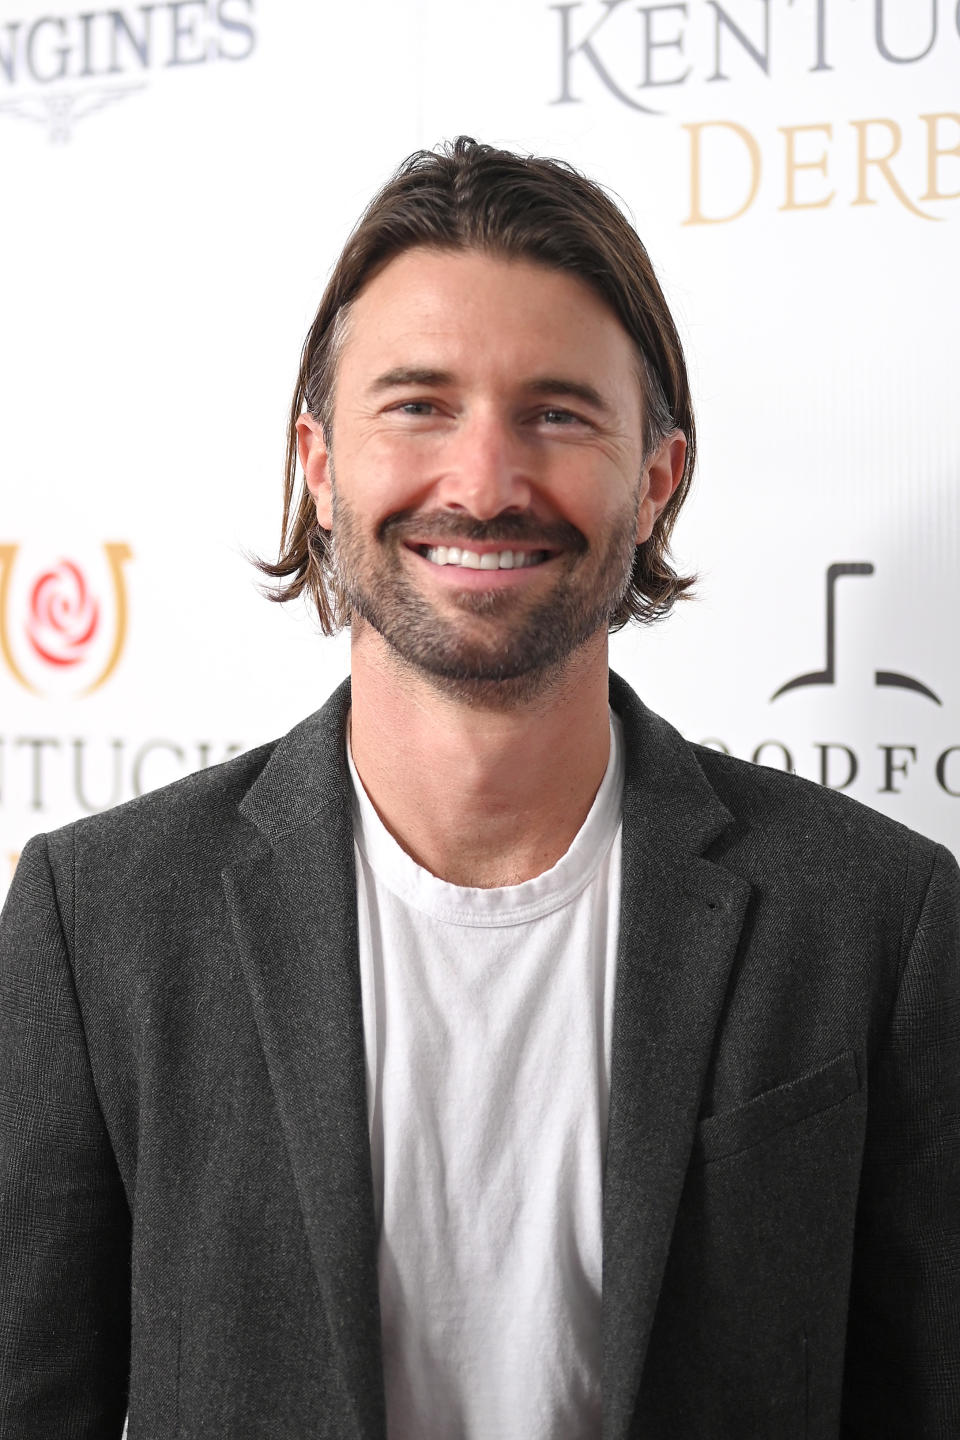 Brandon Jenner attends the 145th Kentucky Derby at Churchill Downs on May 04, 2019 in Louisville, Kentucky. (Photo by Jason Kempin/Getty Images for Churchill Downs)